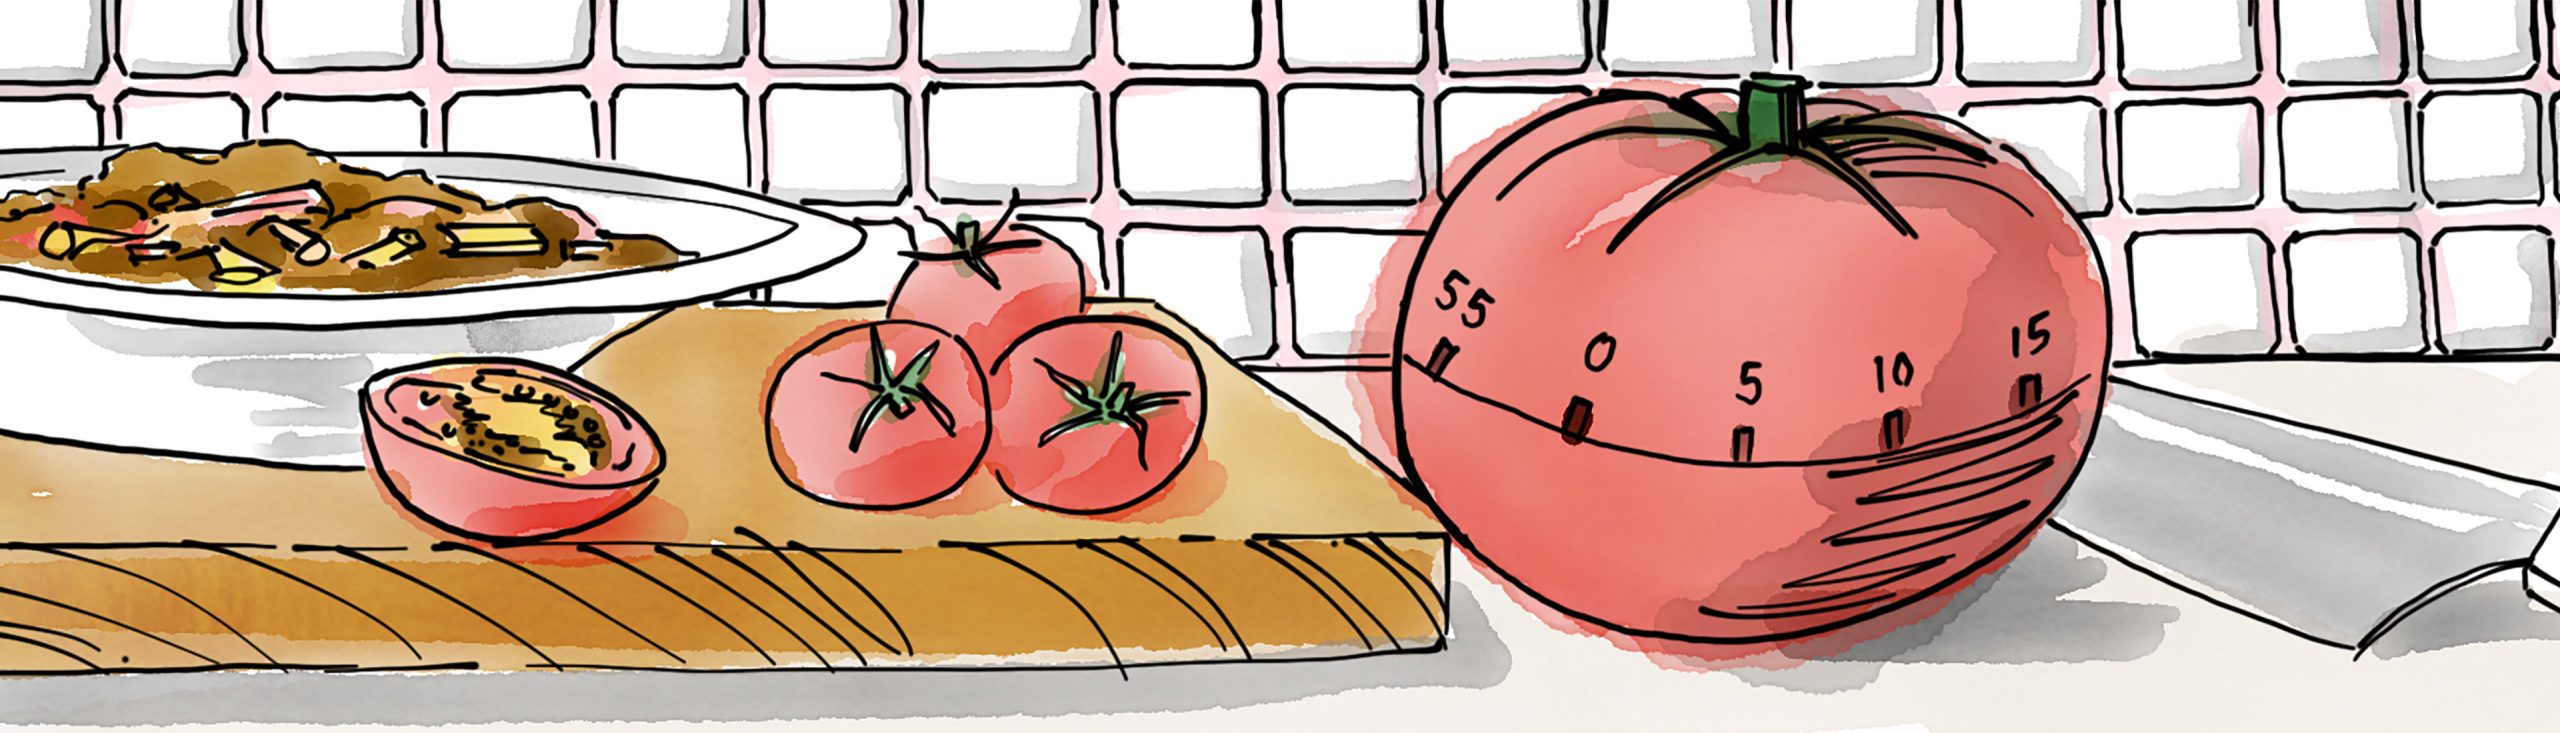 How can an Italian Tomato Make you More Productive?